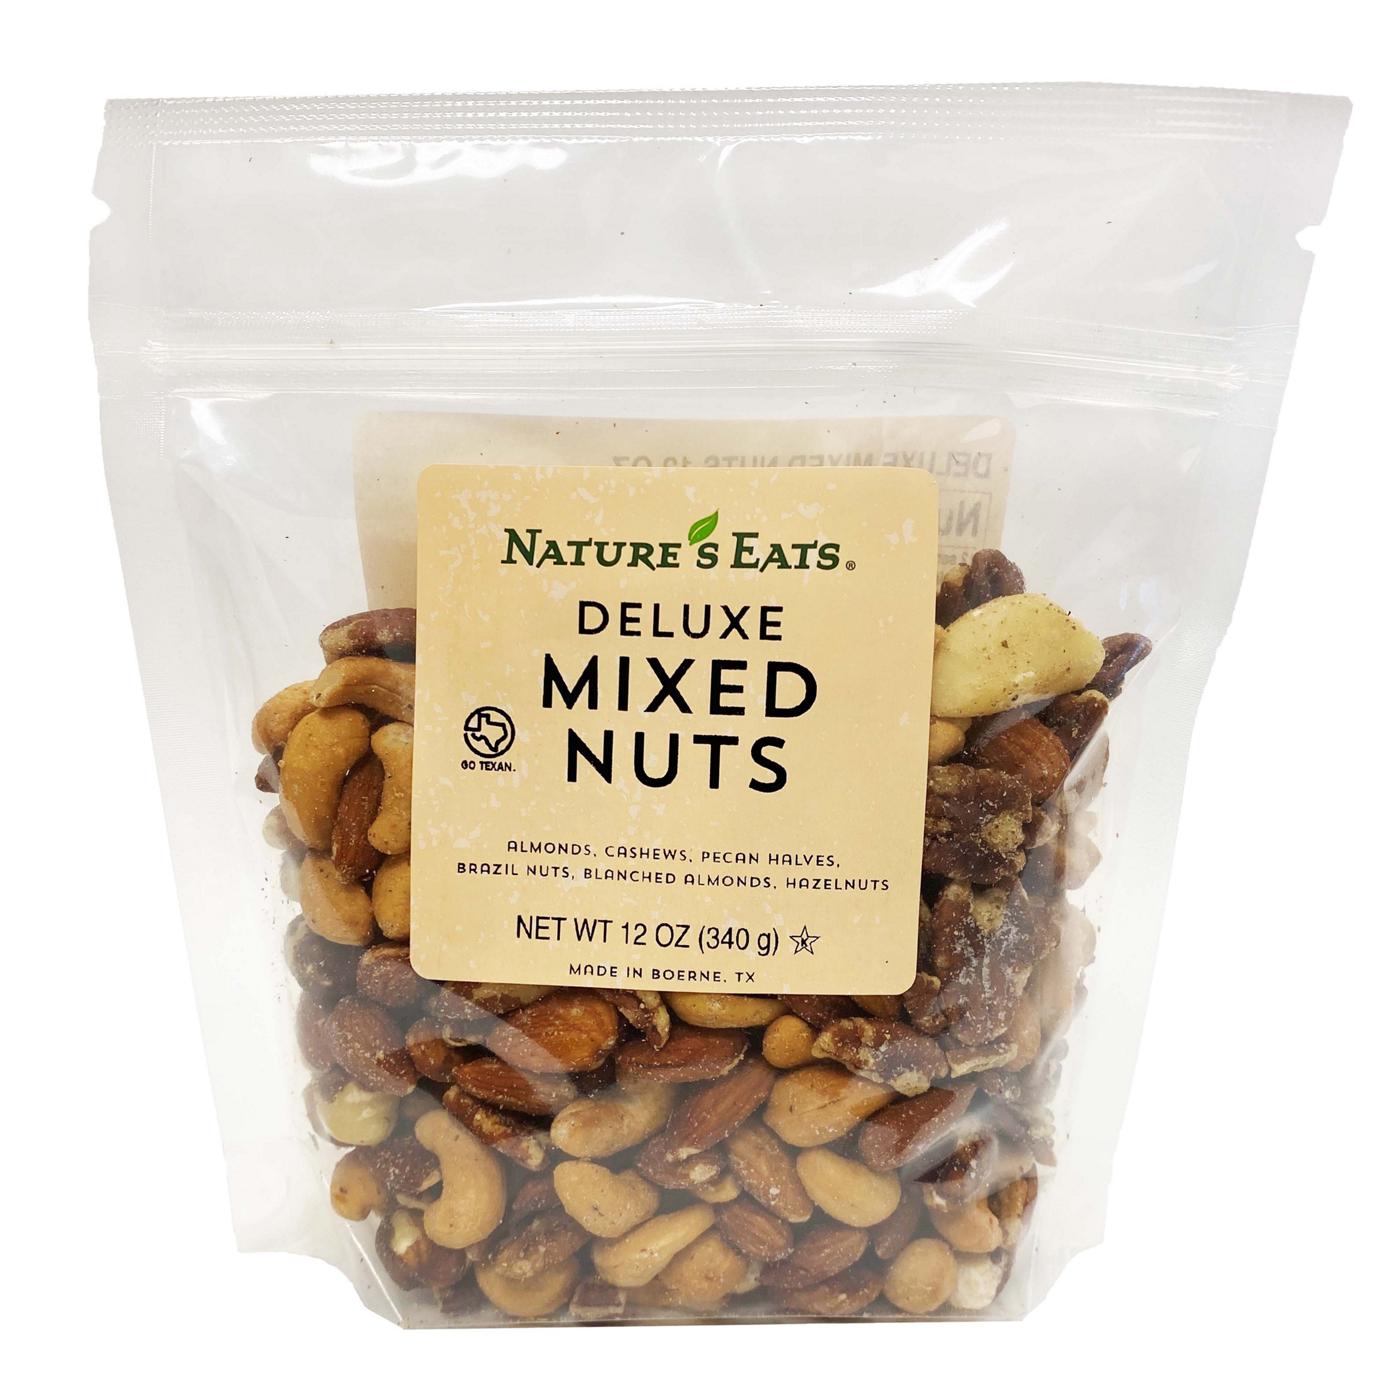 Nature's Eats Deluxe Mixed Nuts; image 1 of 2